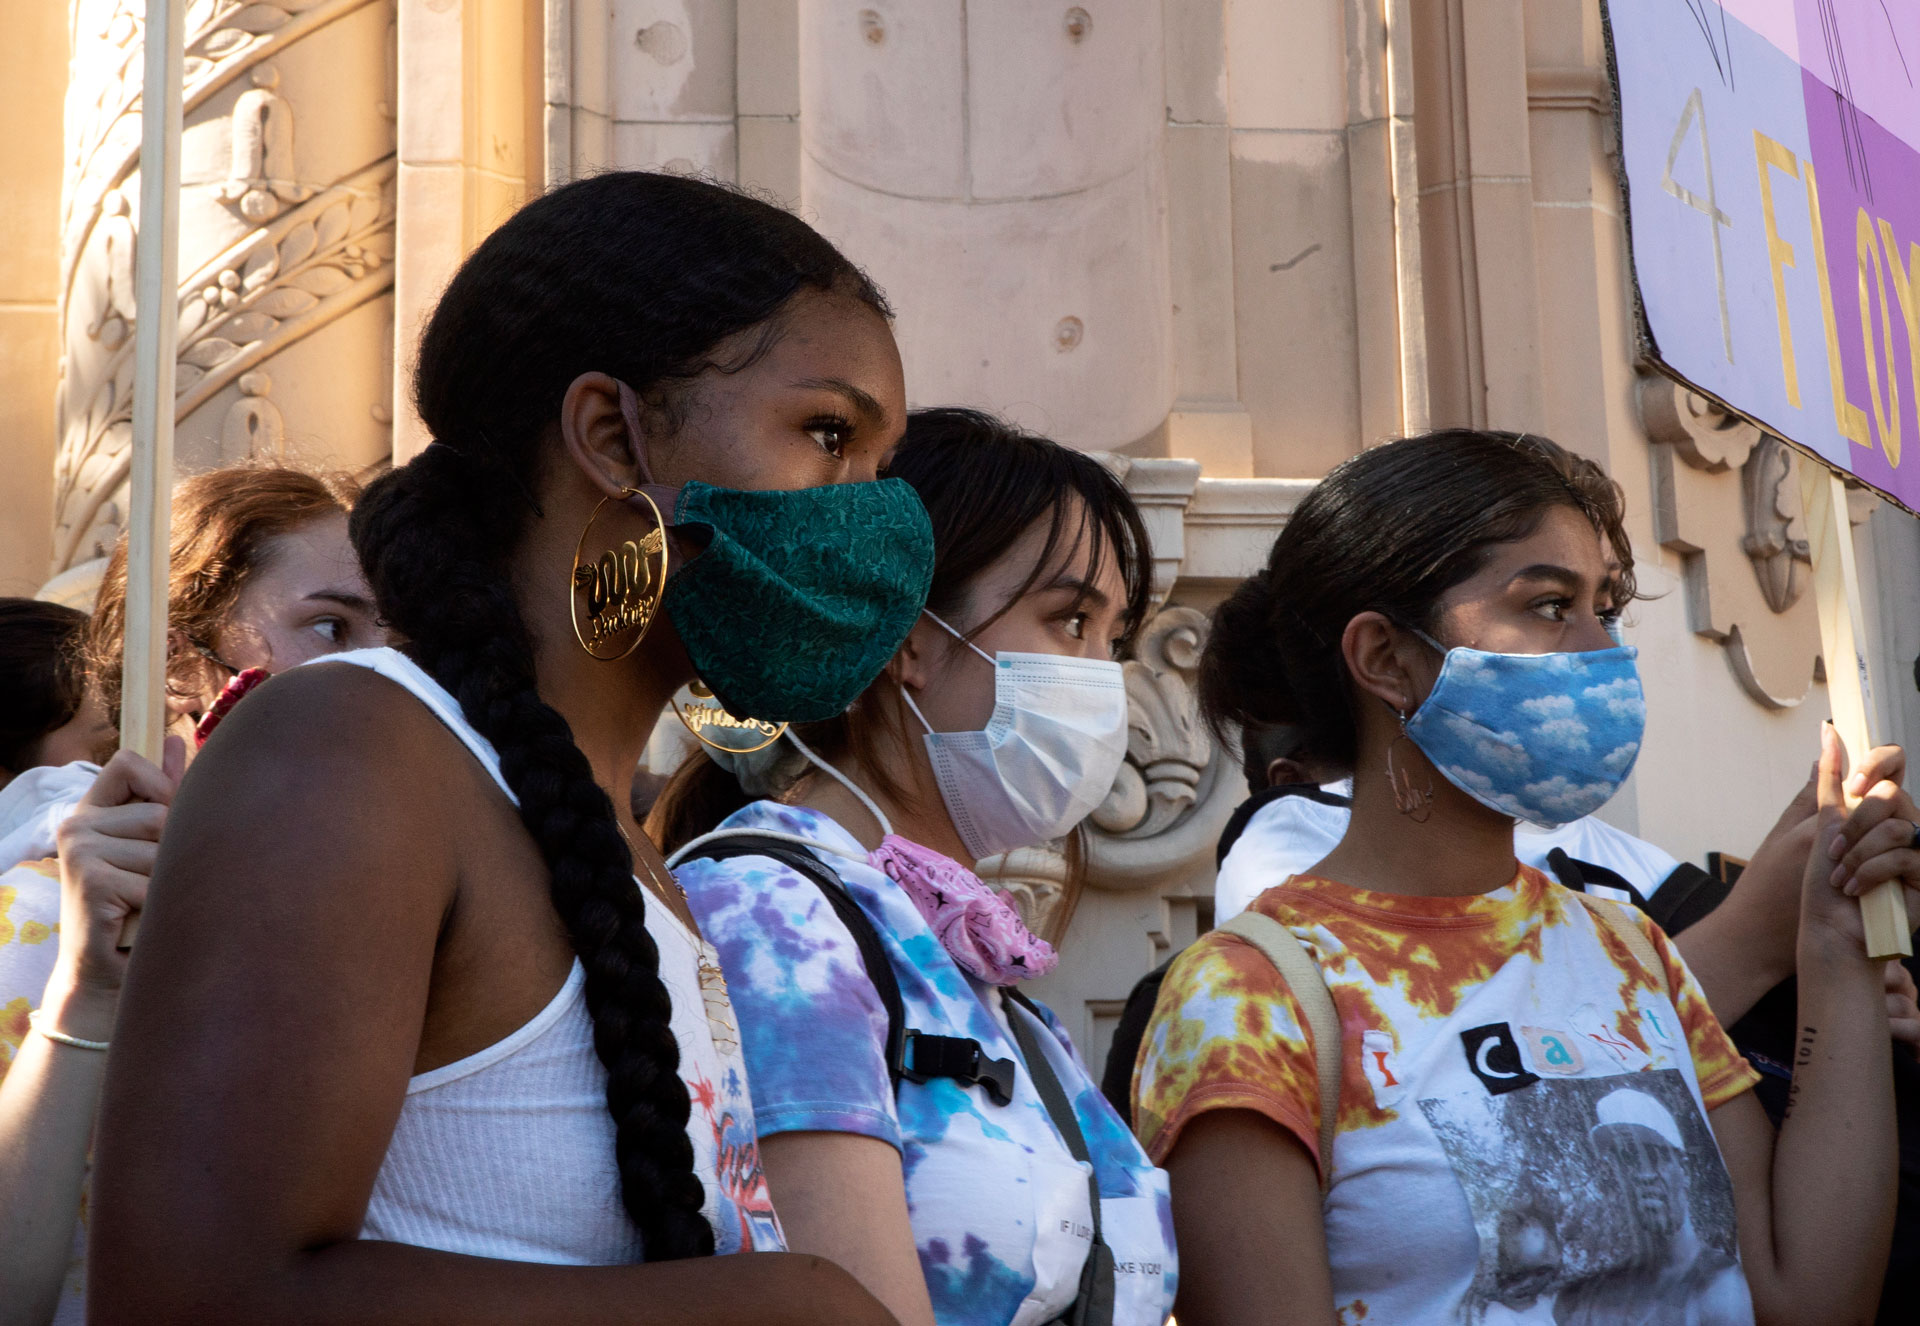 Simone Jacques (left) with fellow protesters during a march she organized in San Francisco on June 3, 2020.